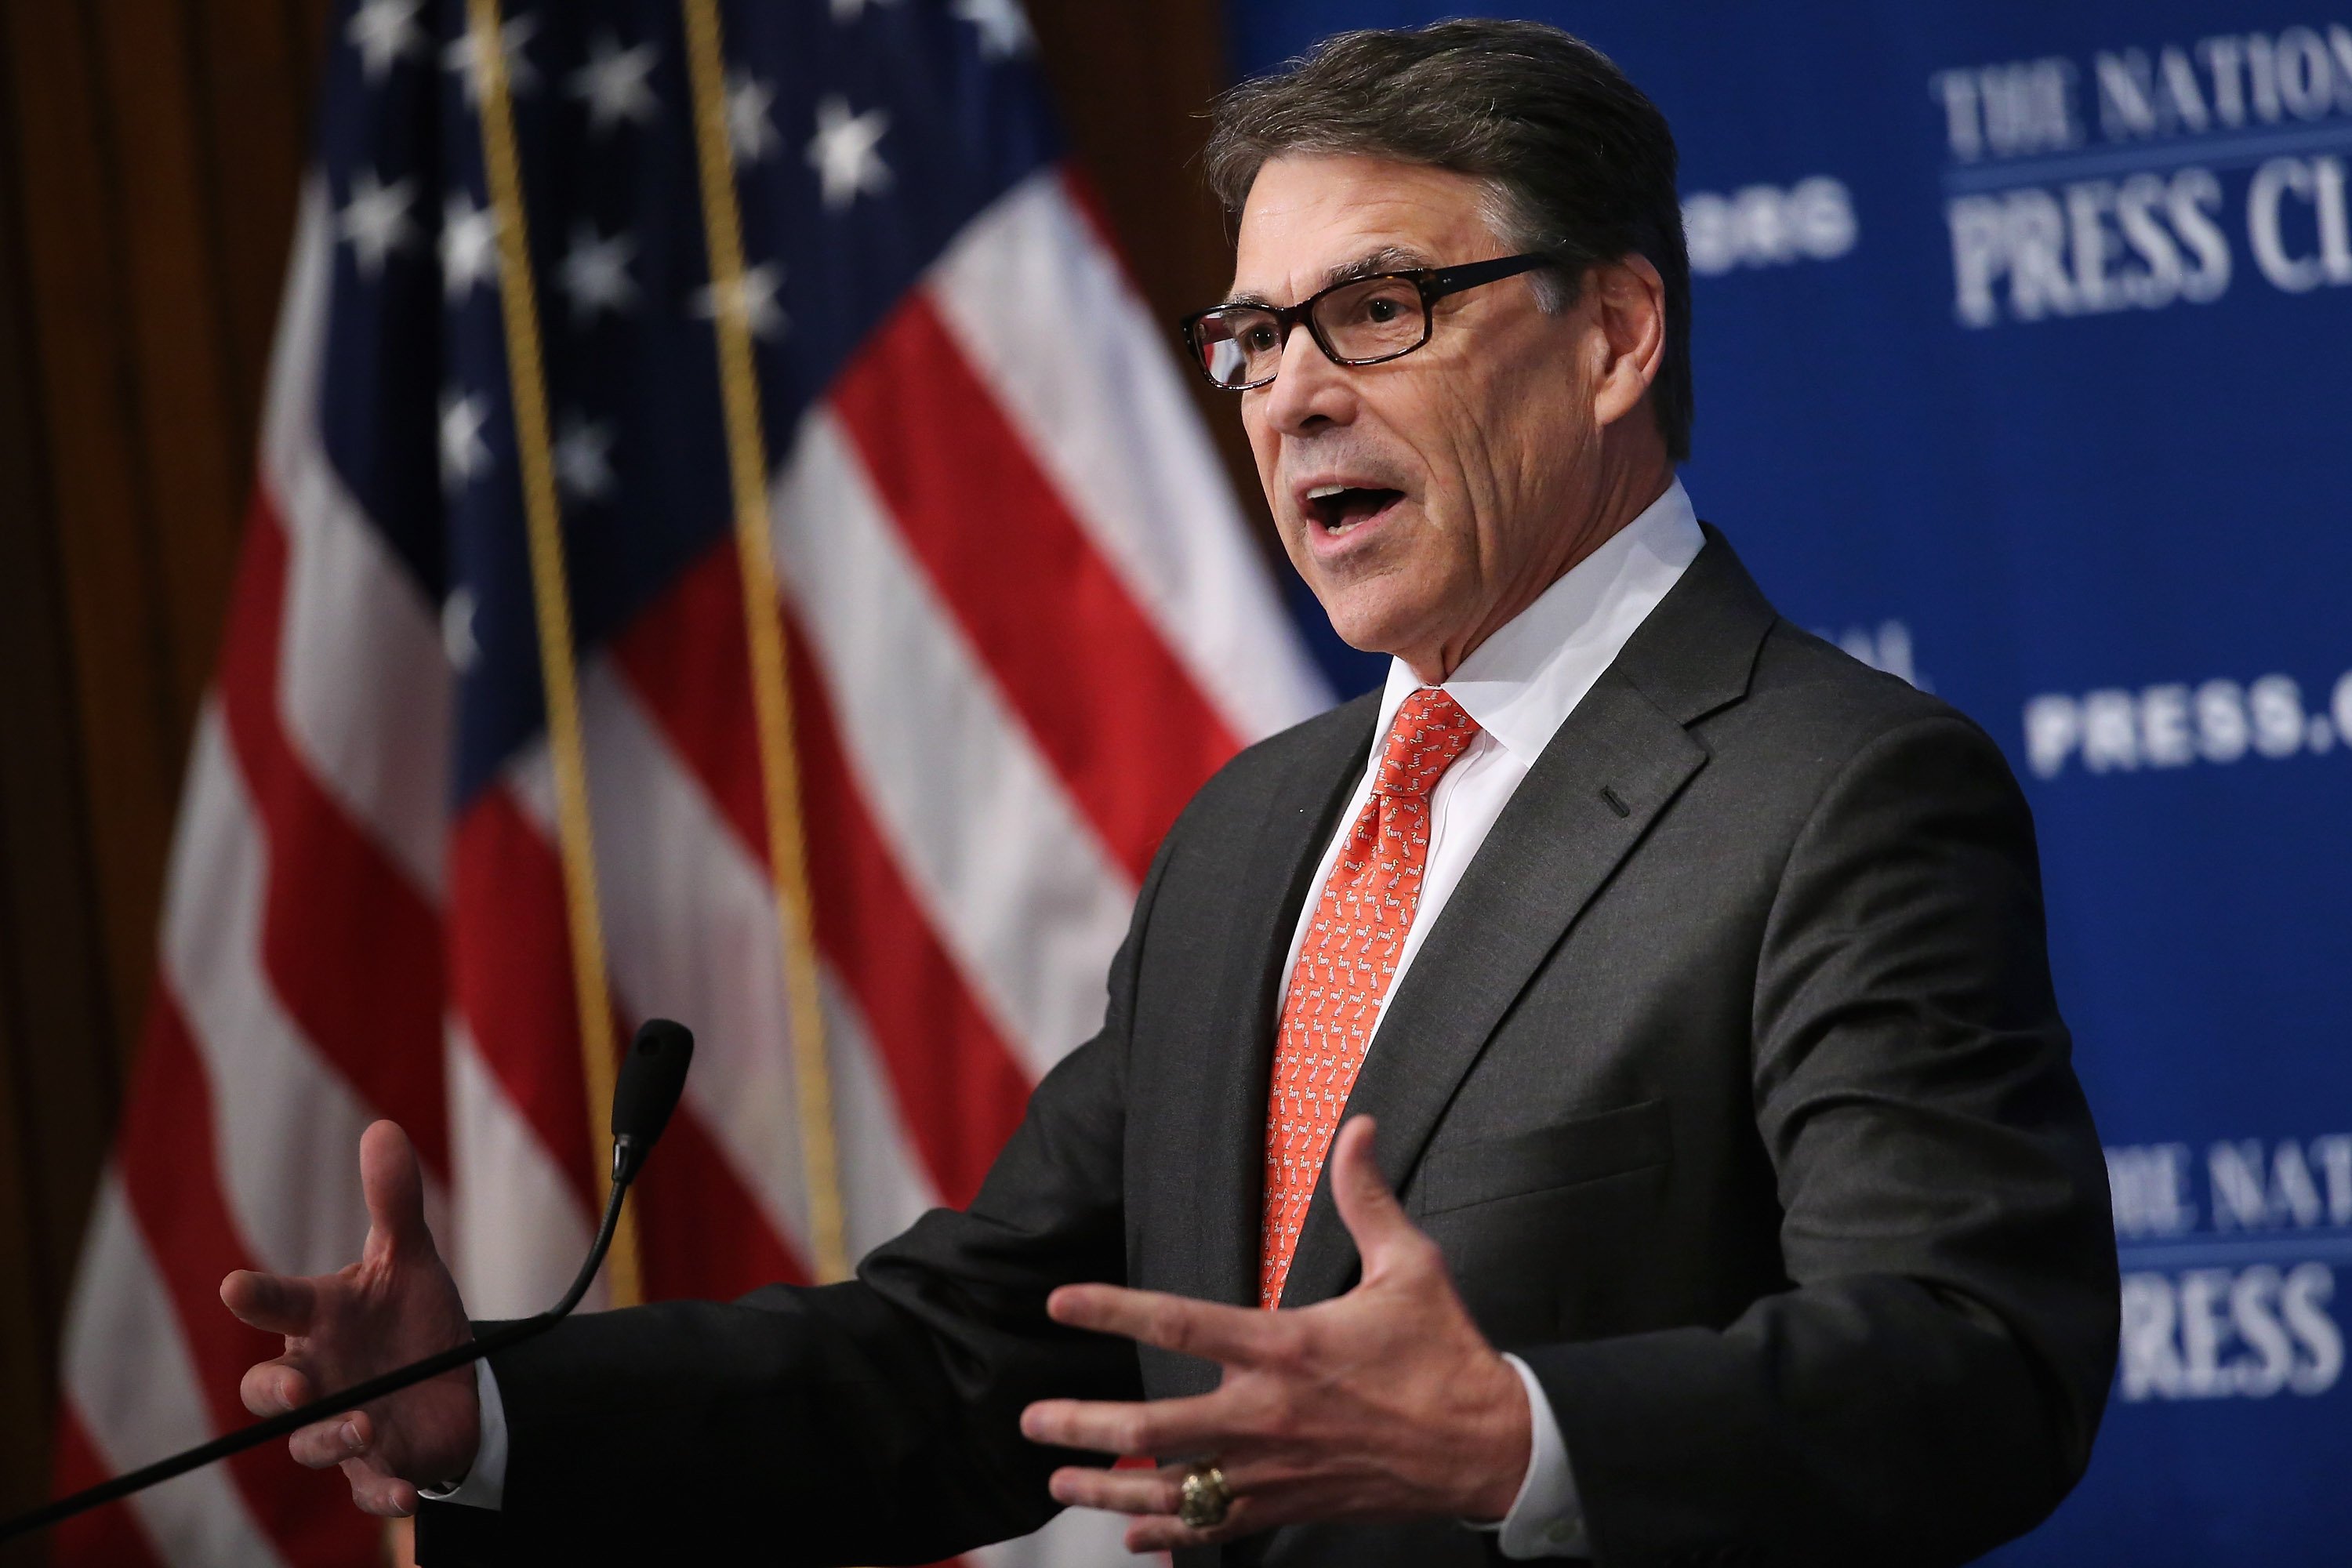 Former Texas Governor and Republican presidential candidate Rick Perry addresses the National Press Club Luncheon July 2, 2015 in Washington.